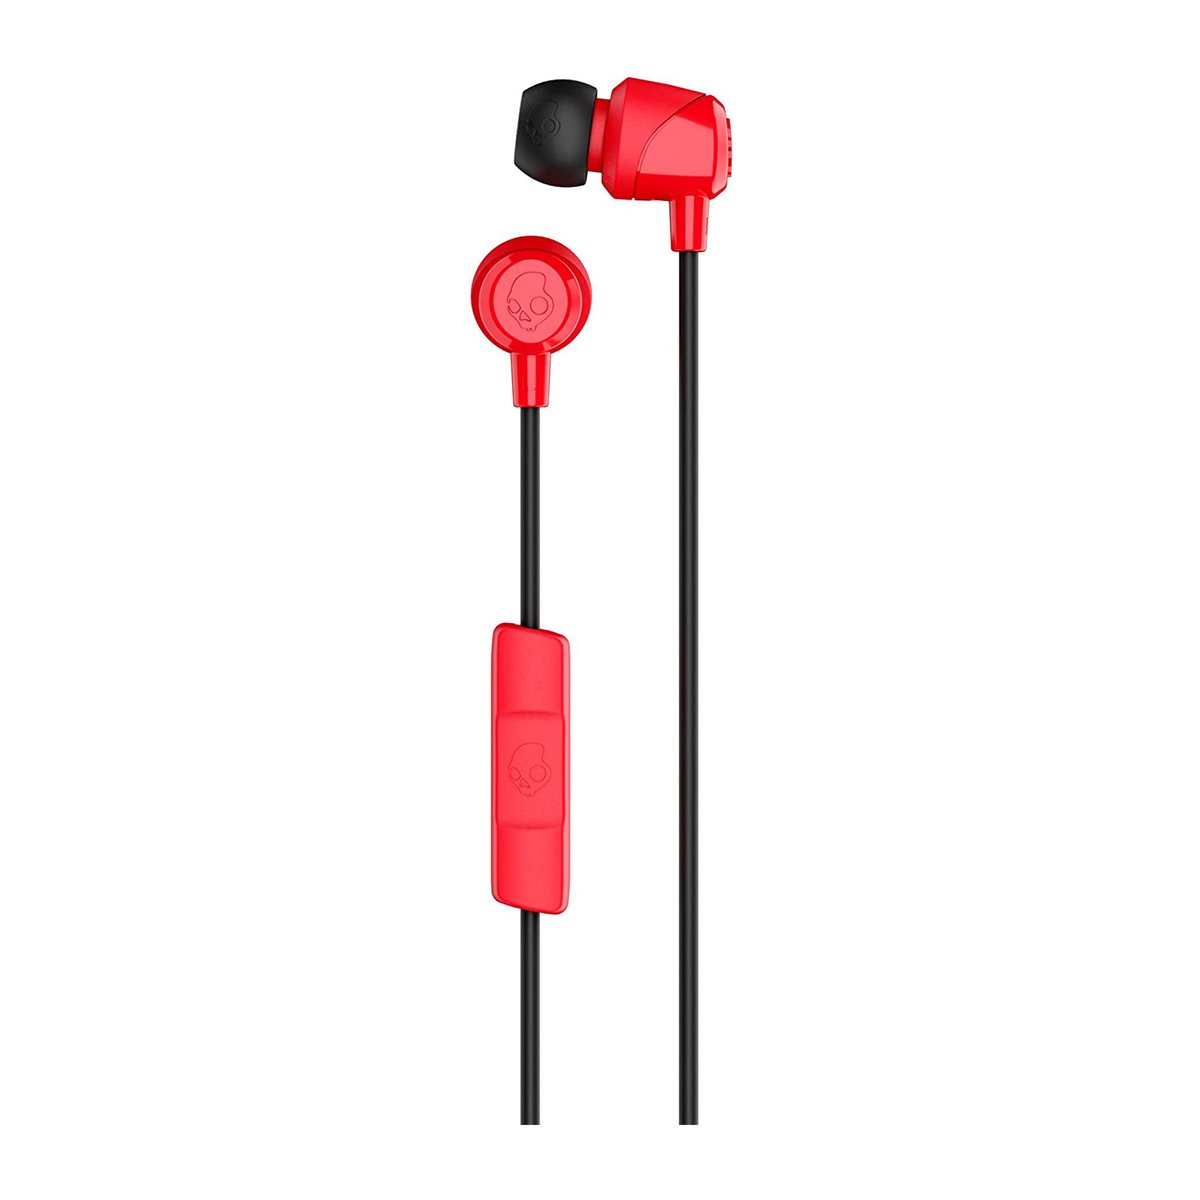 Skullcandy S2DUY-L676 Jib In-Ear Noise-Isolating Earbuds with Microphone and Remote for Hands-Free Calls - Red/Black